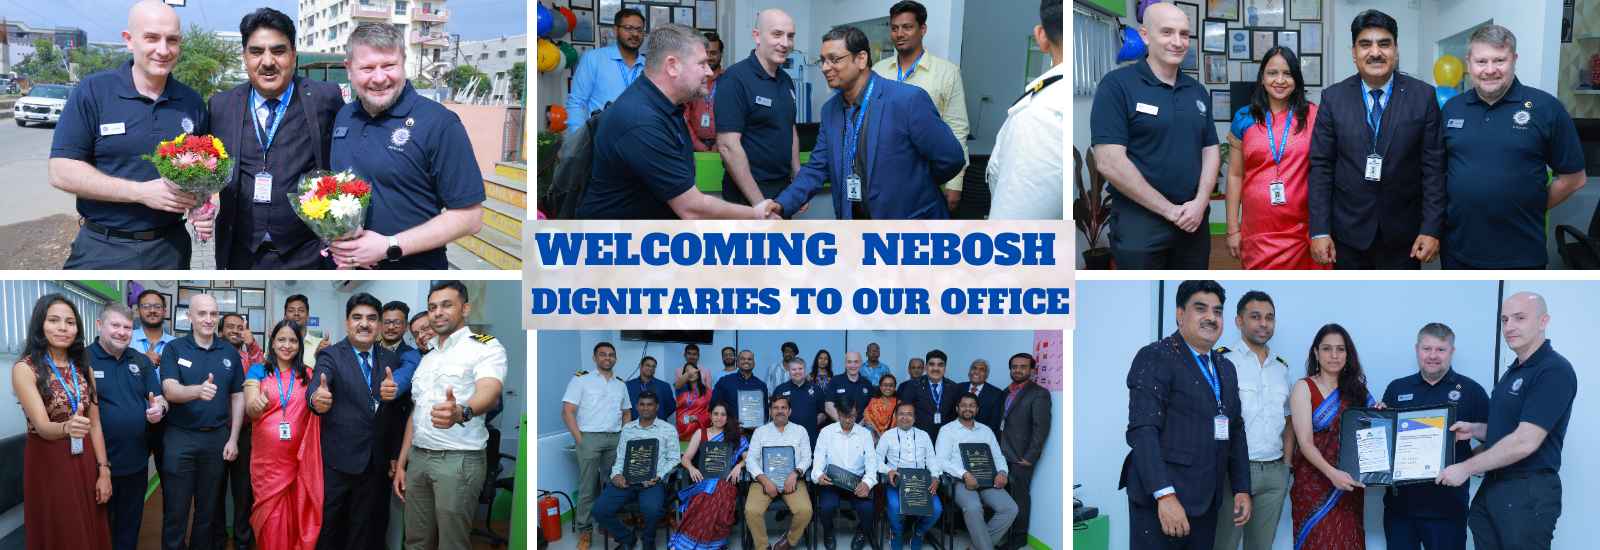 NEBOSH Officials Visits to our Office